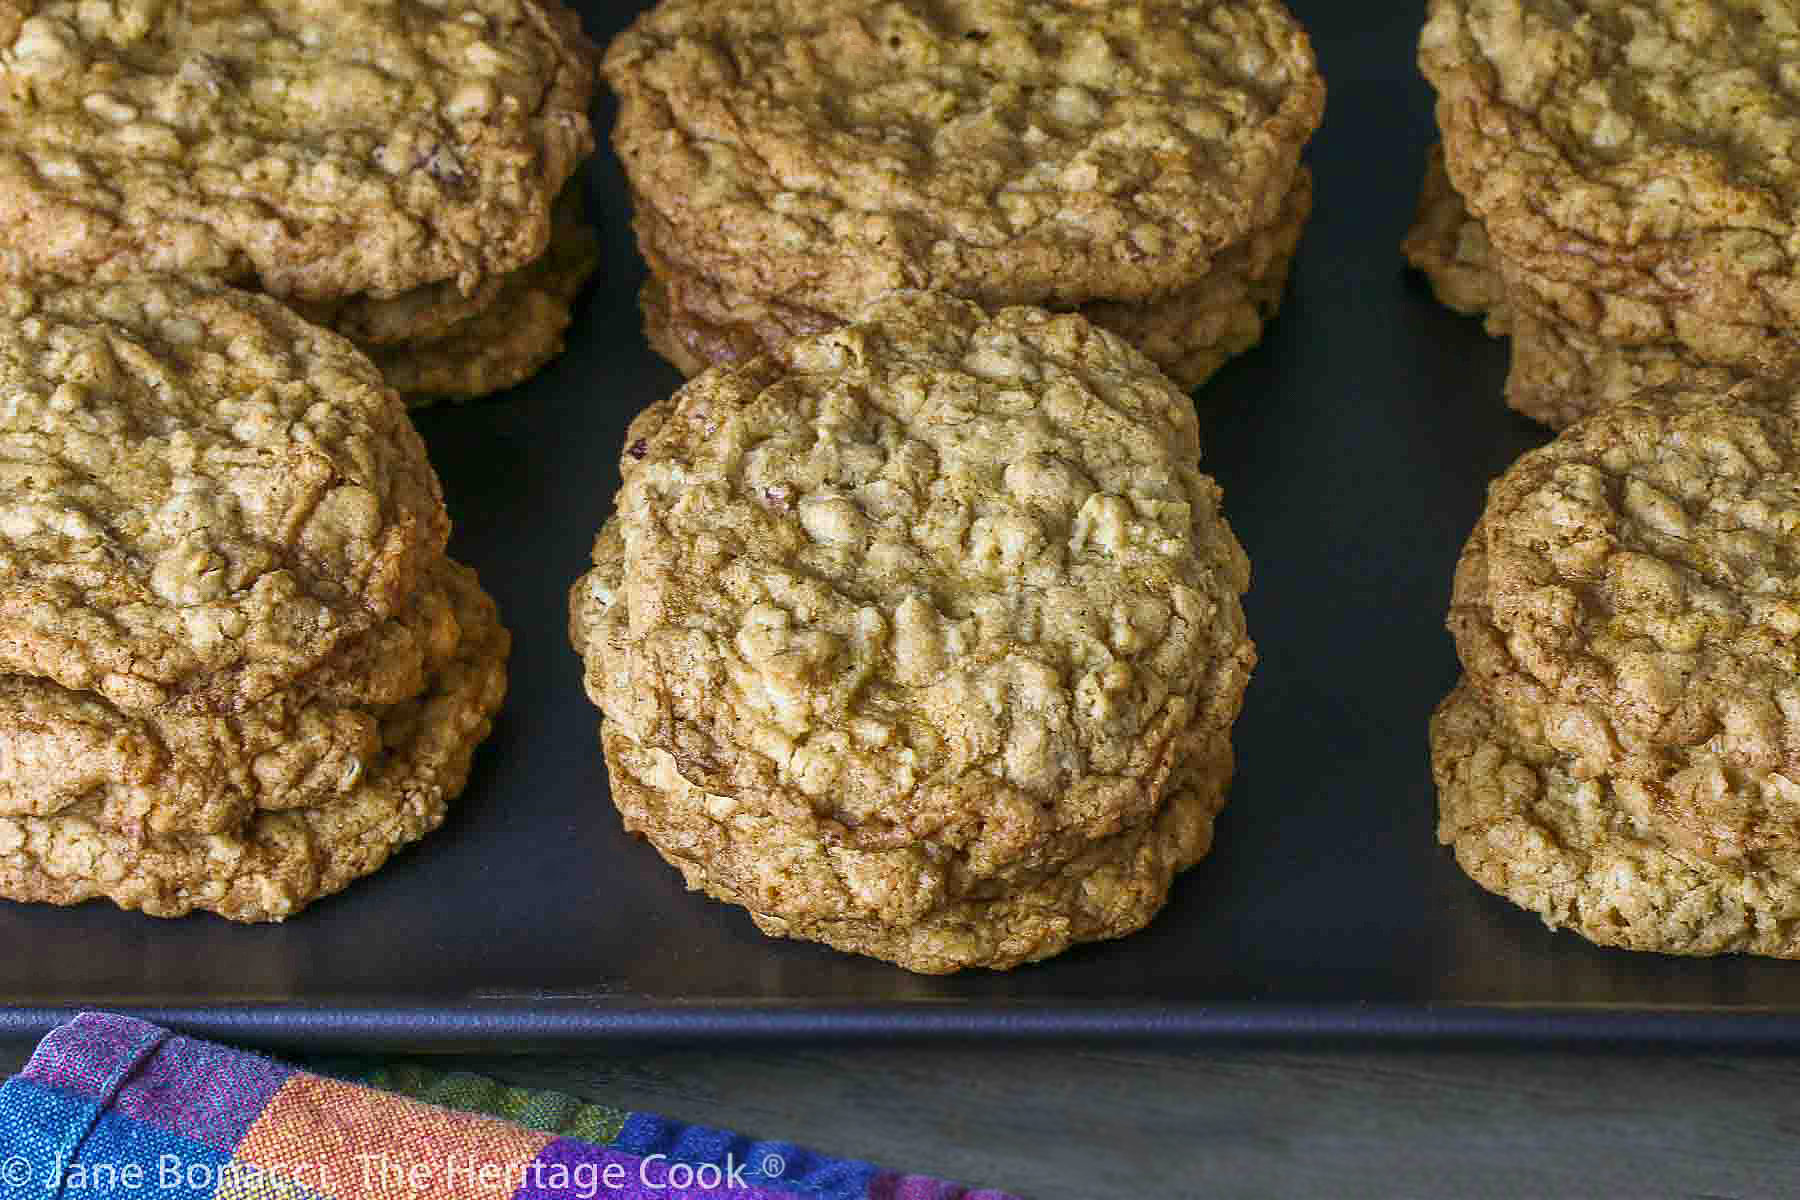 Looking down on stacks of oatmeal cookies with white chocolate and pecans, Jane Bonacci, The Heritage Cook.